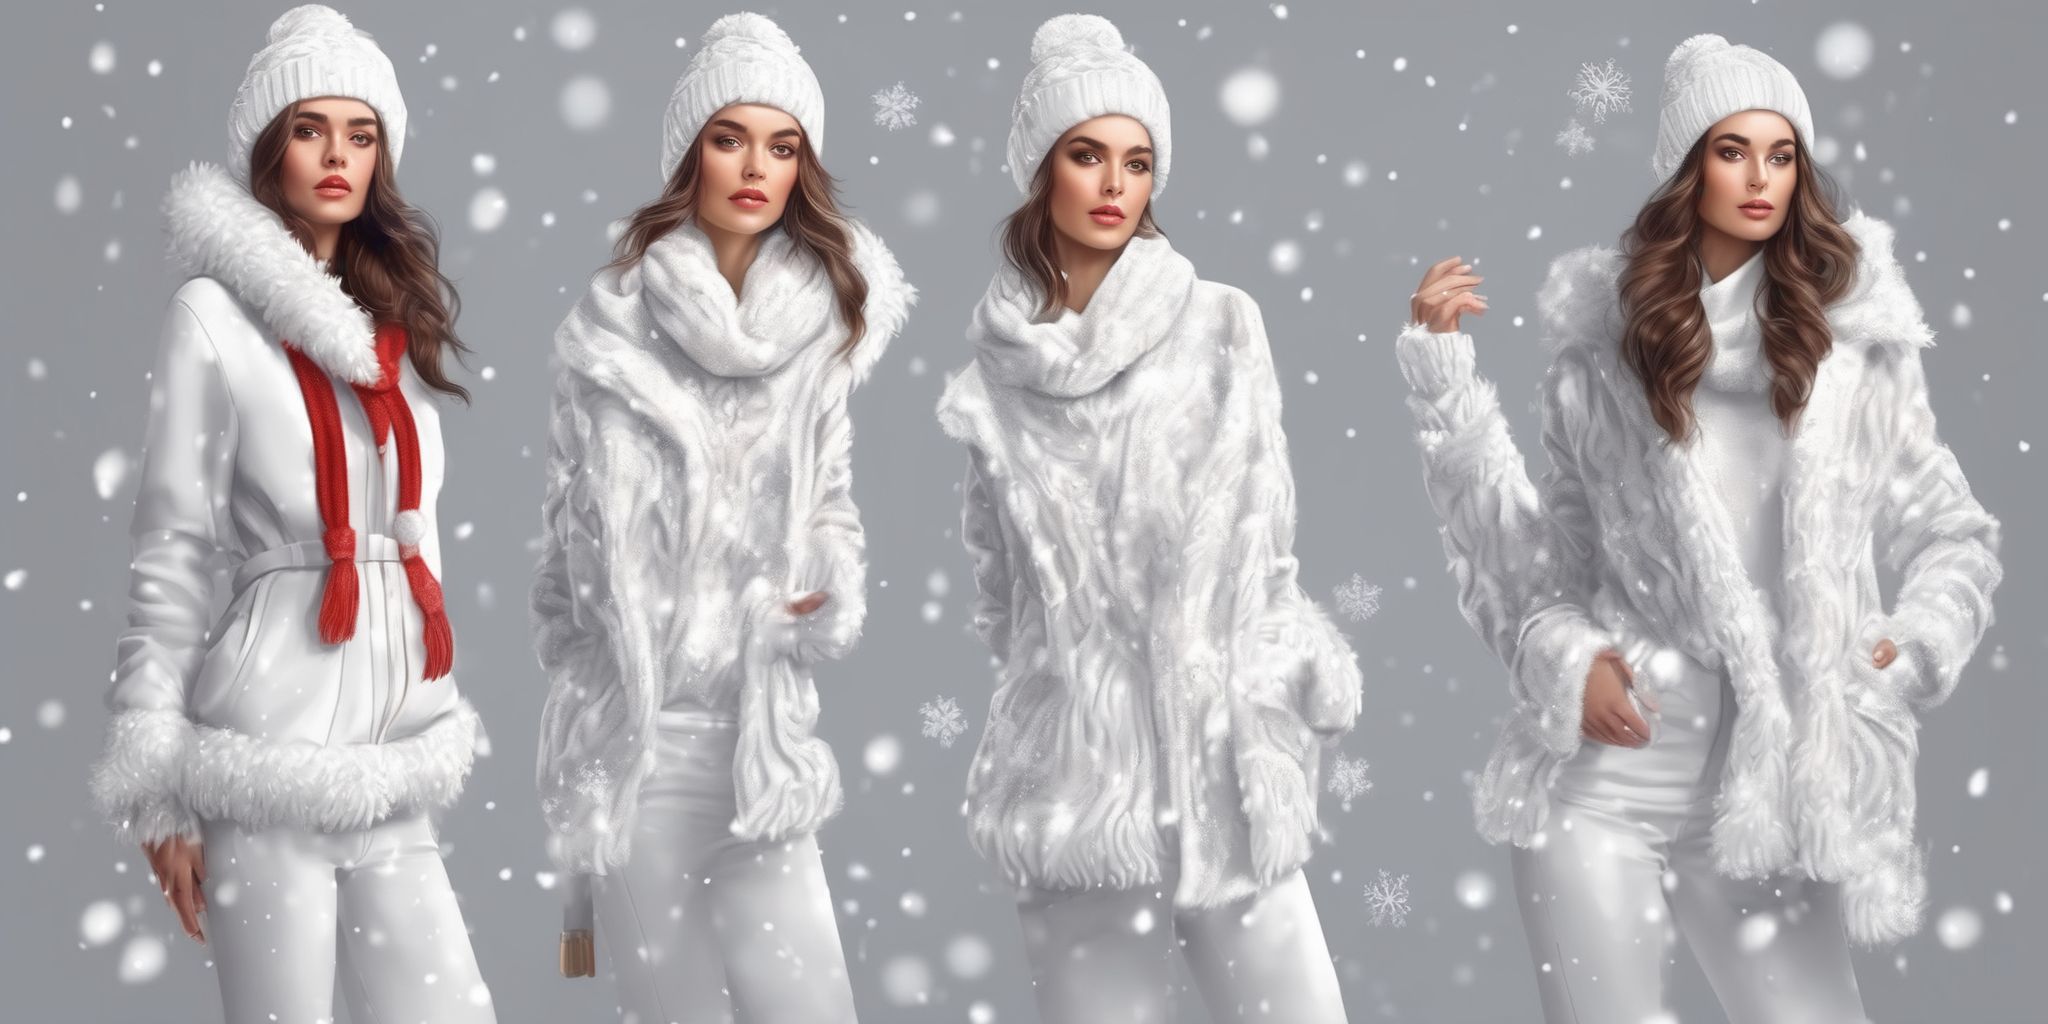 Snow fashion in realistic Christmas style